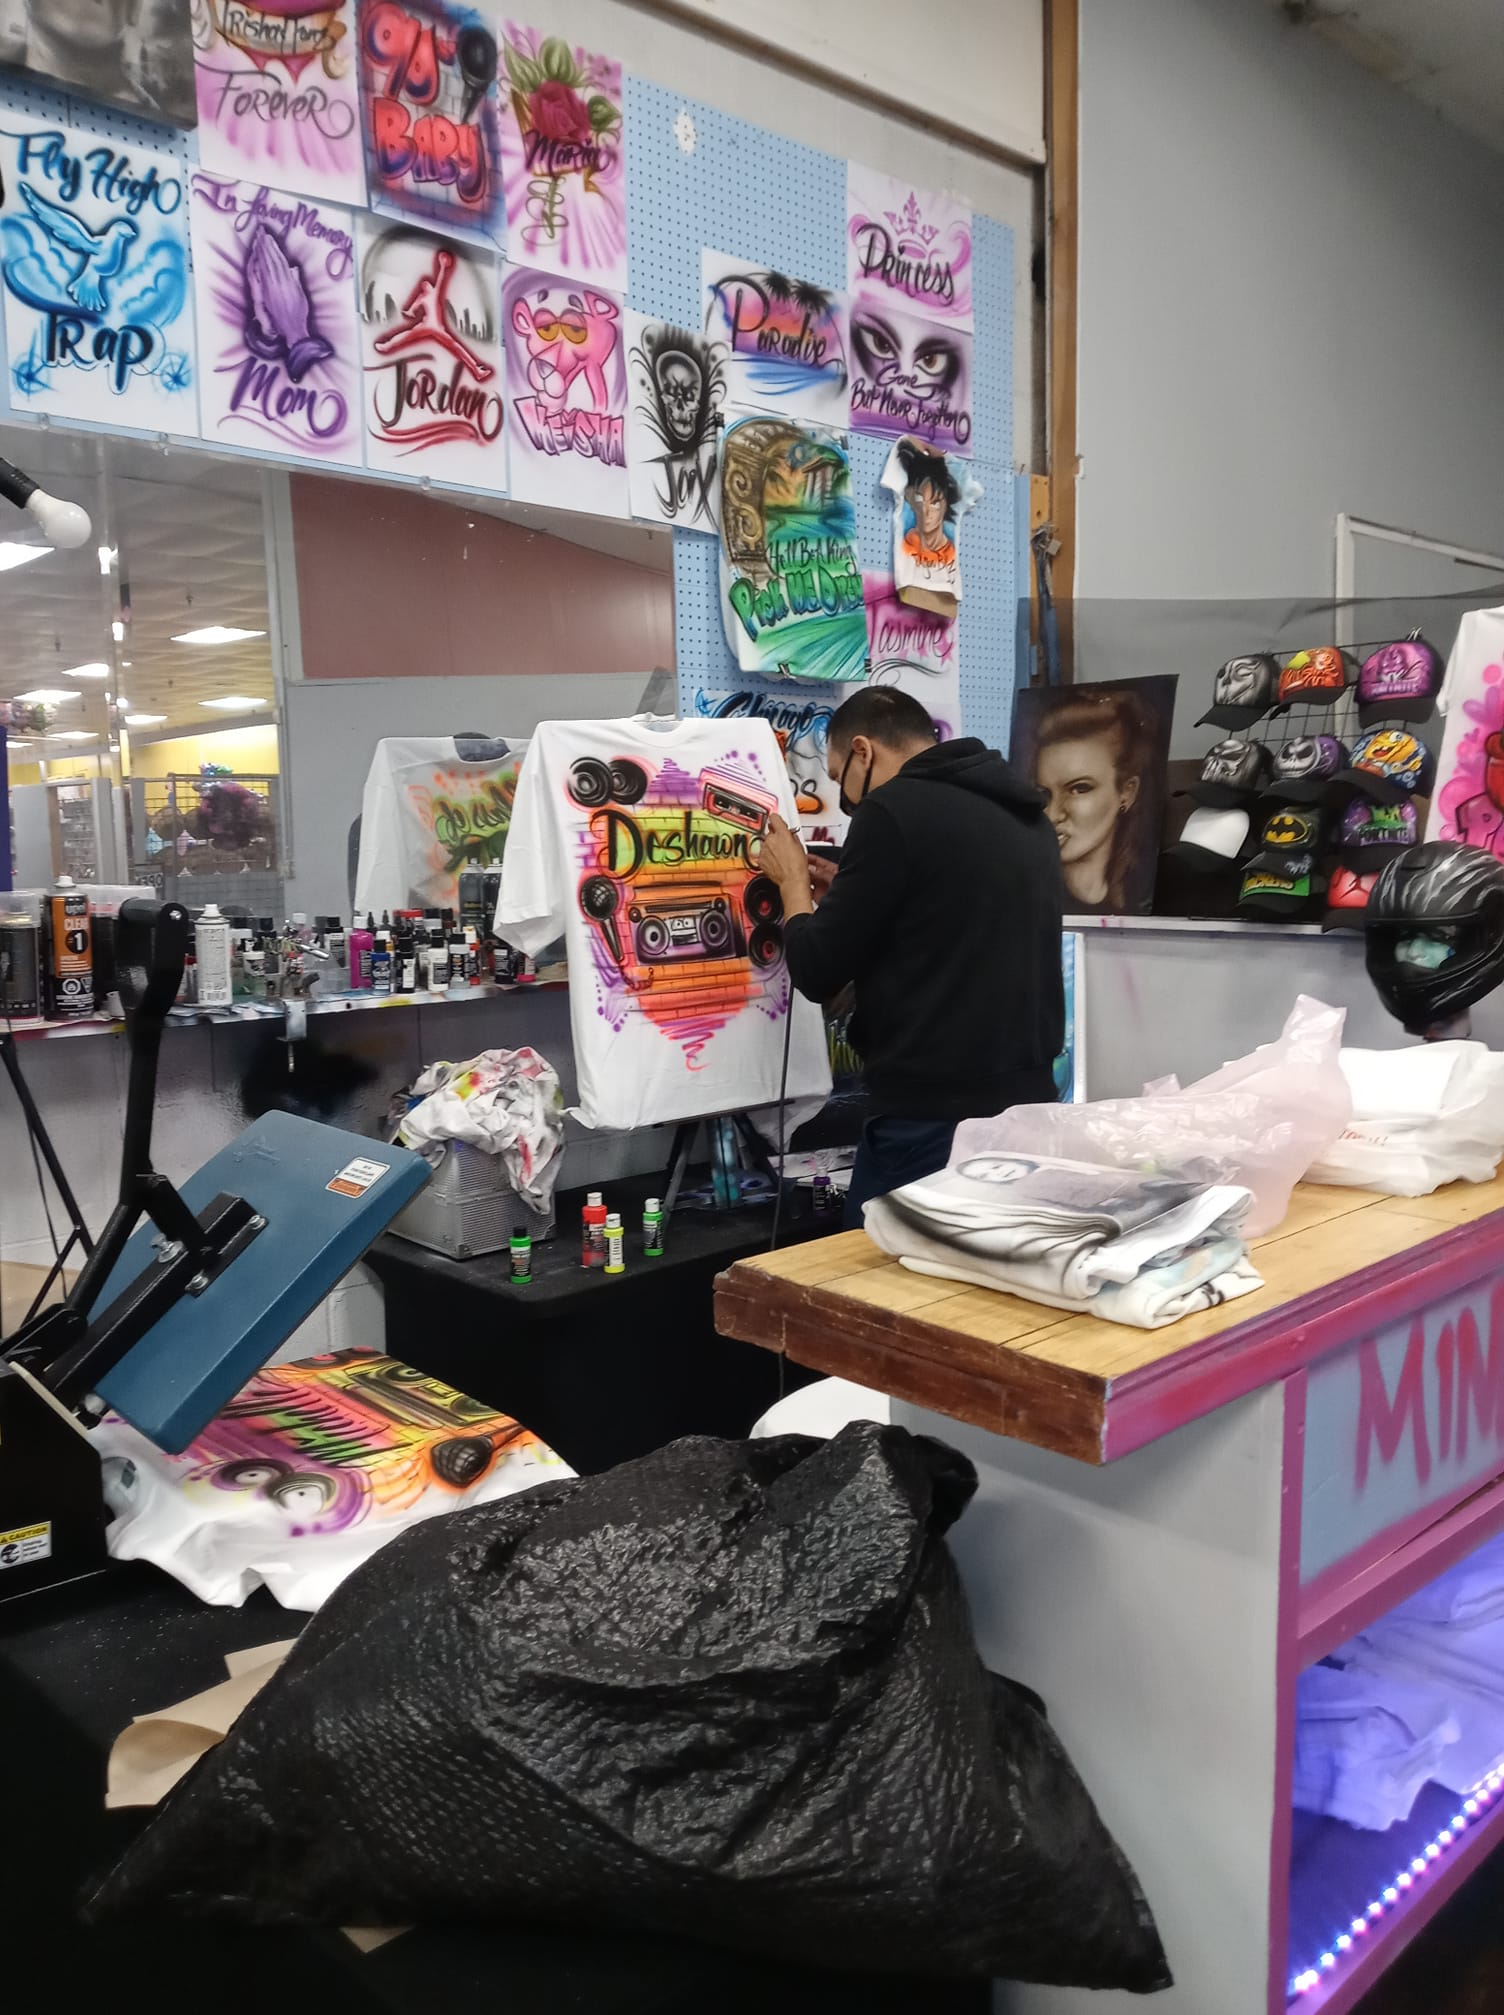 Get all your airbrush needs filled. Right here at the flee market.Mindless paint is located in the far right corner of the mall.